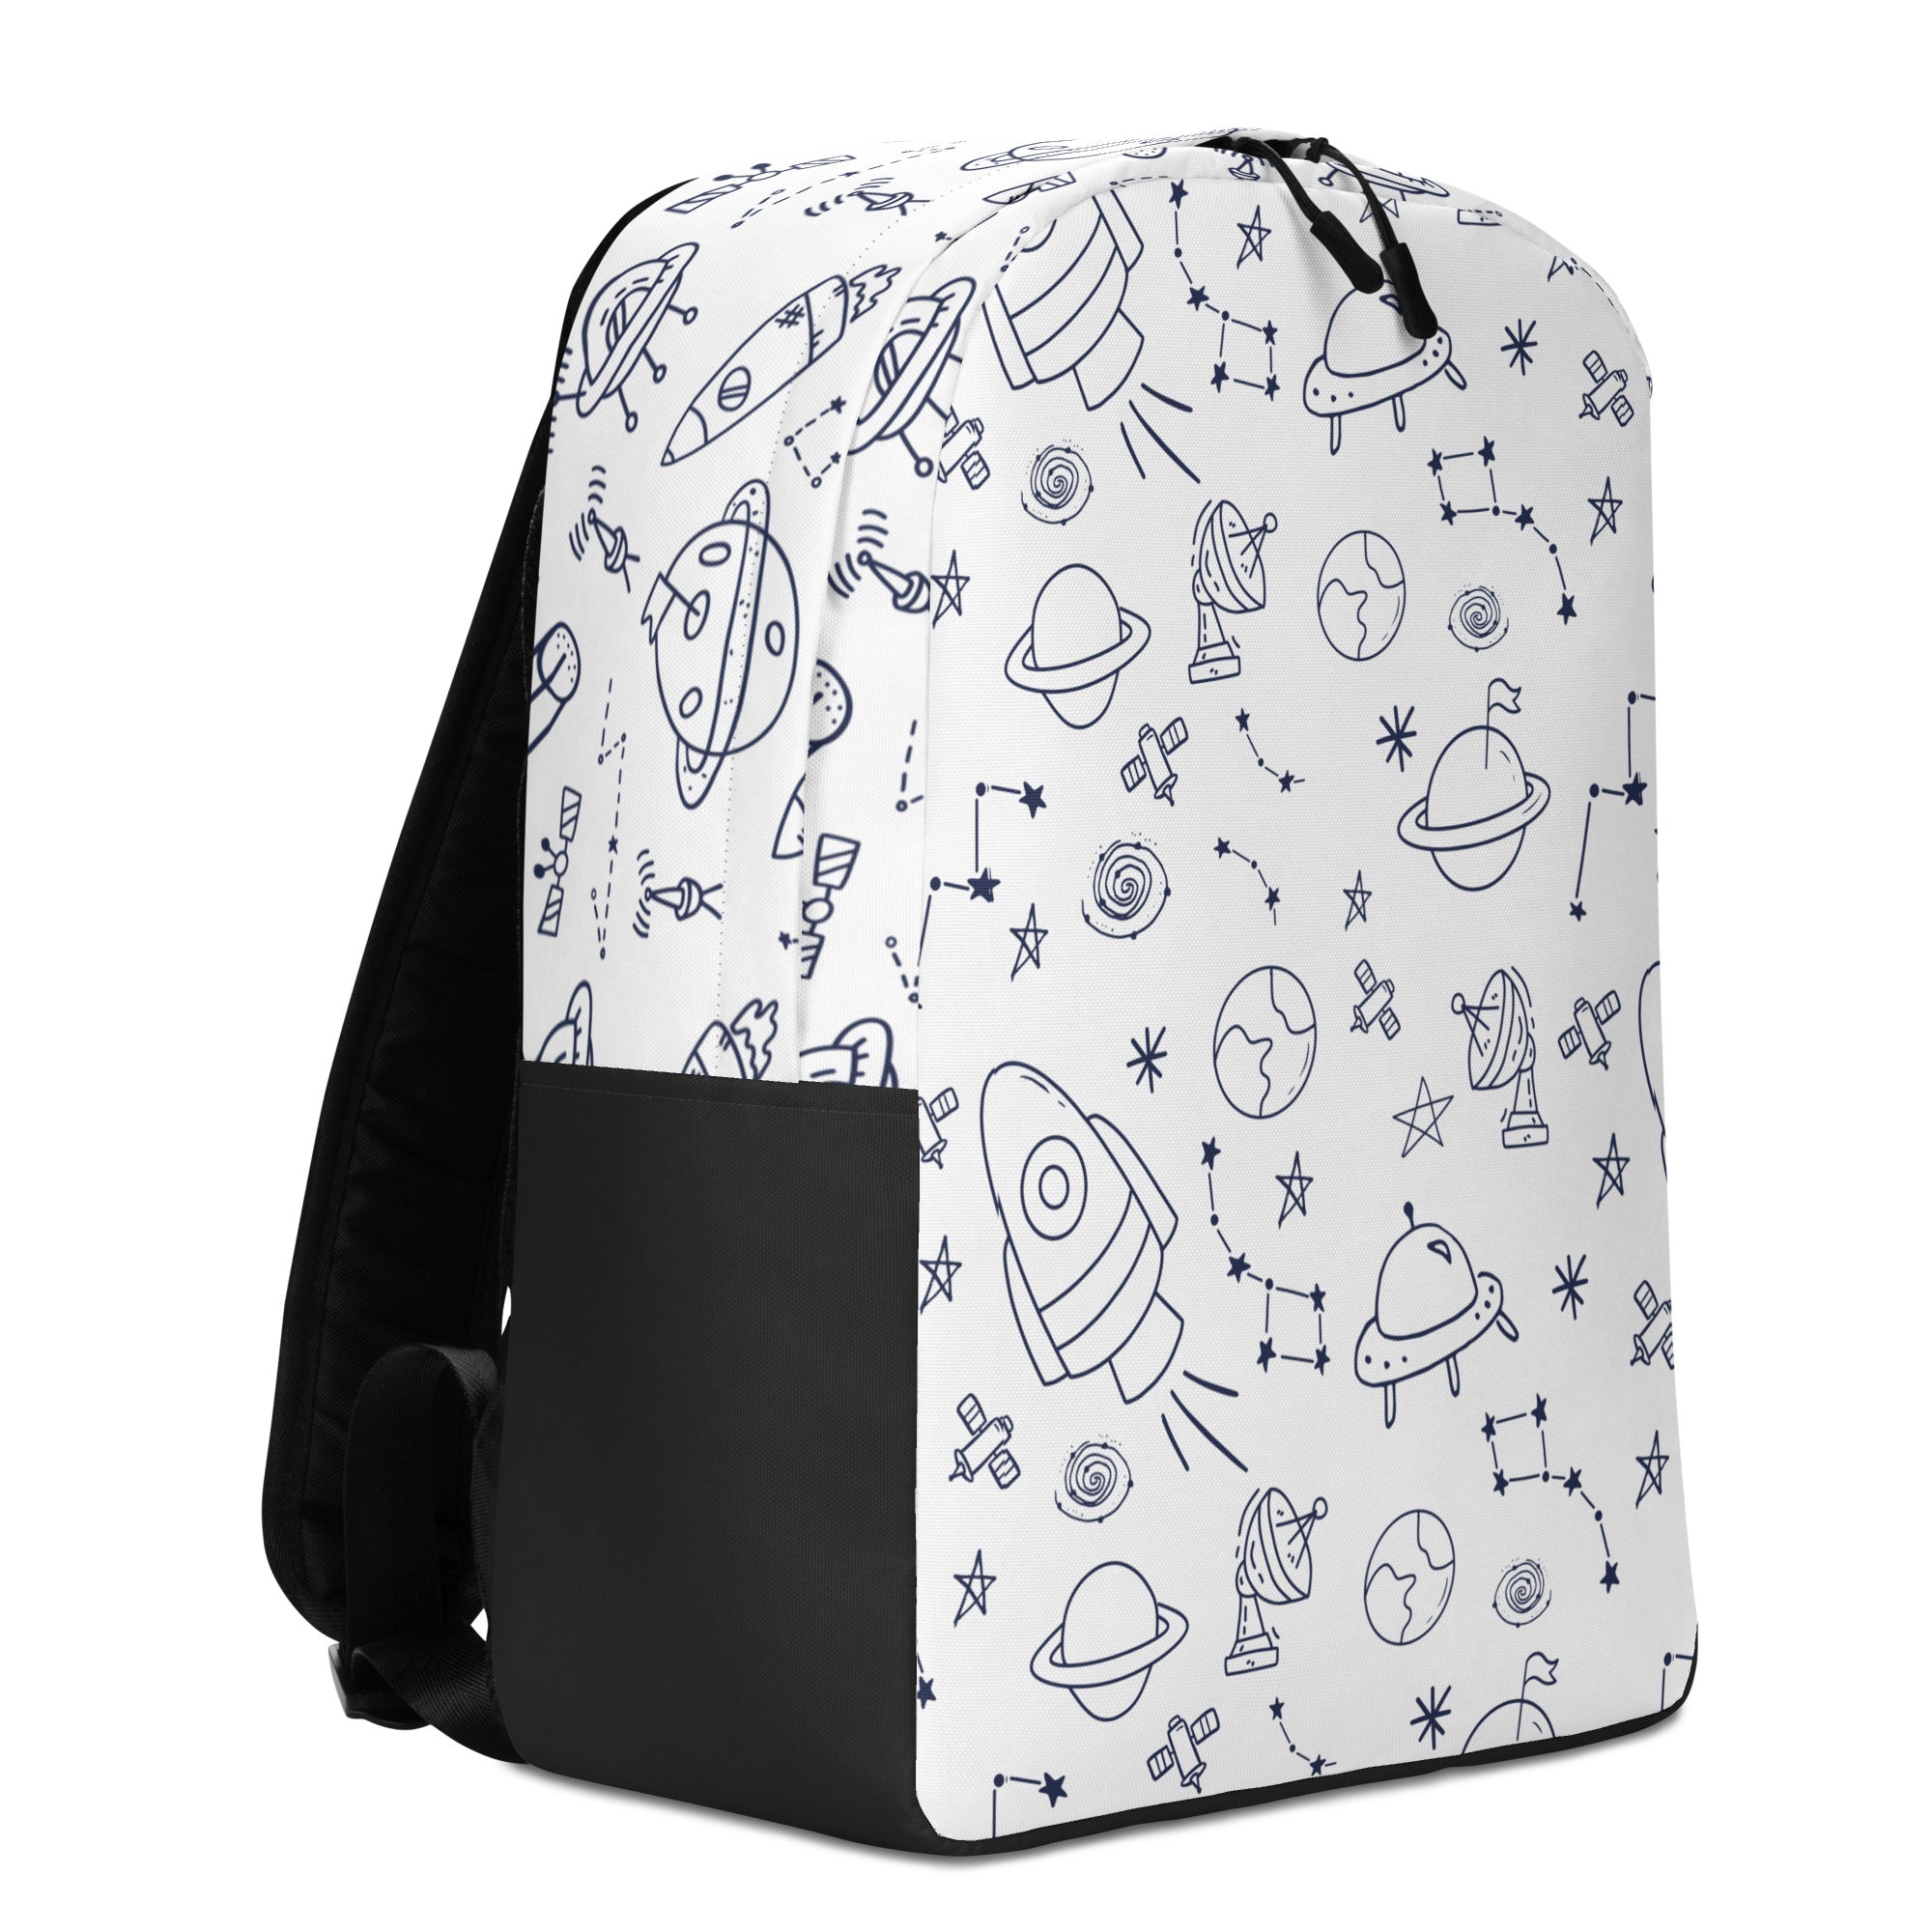 Kids backpack black and white with space design